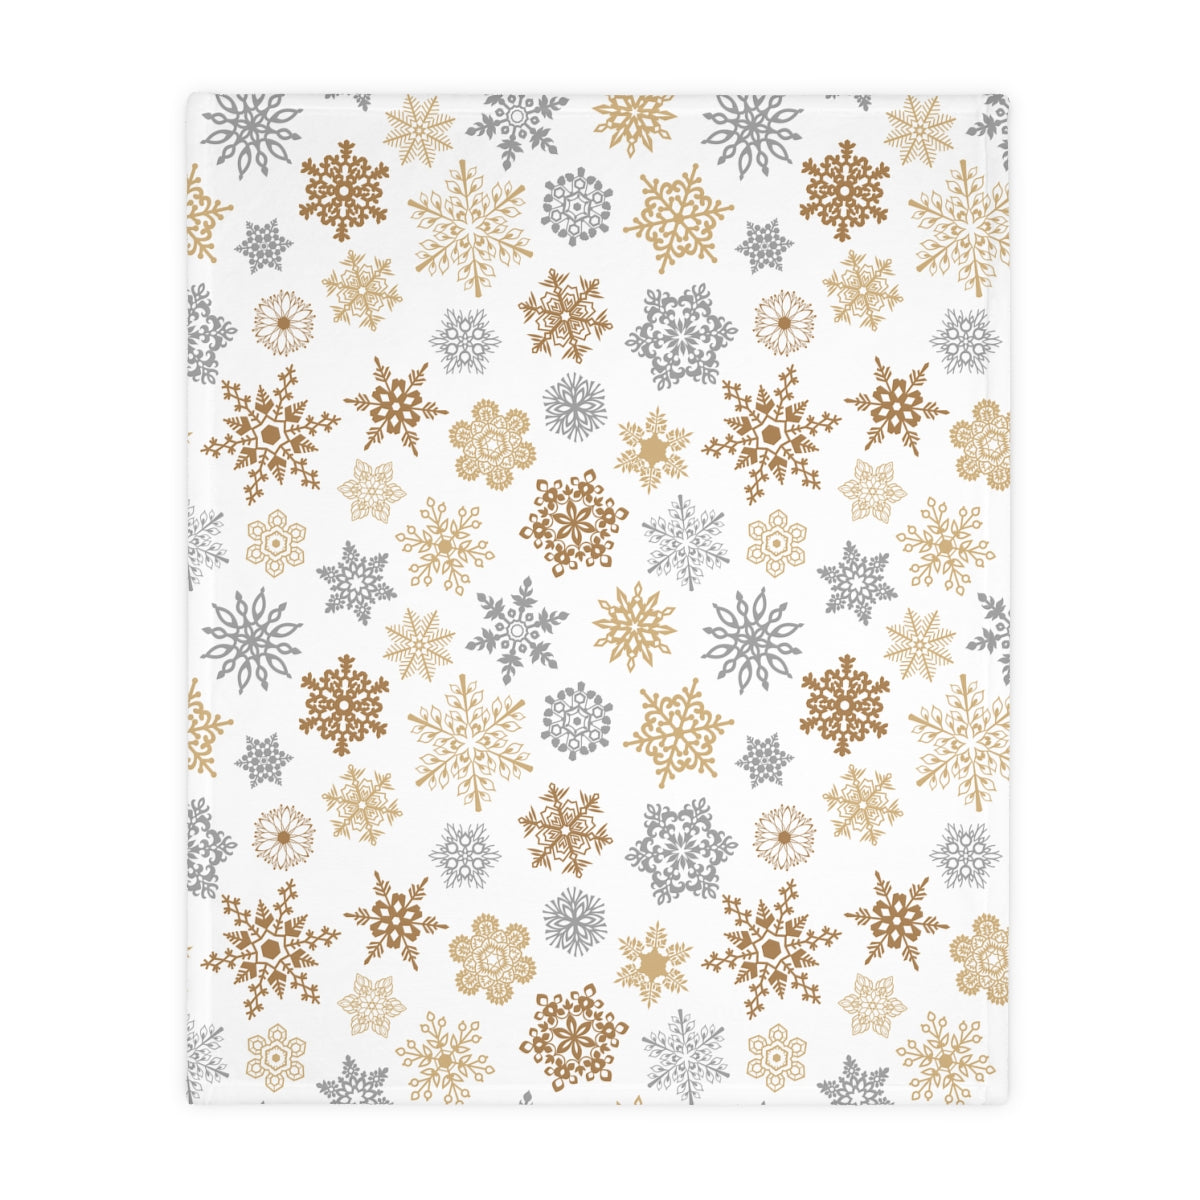 Gold and Silver Snowflakes Velveteen Minky Blanket (Two-sided print)